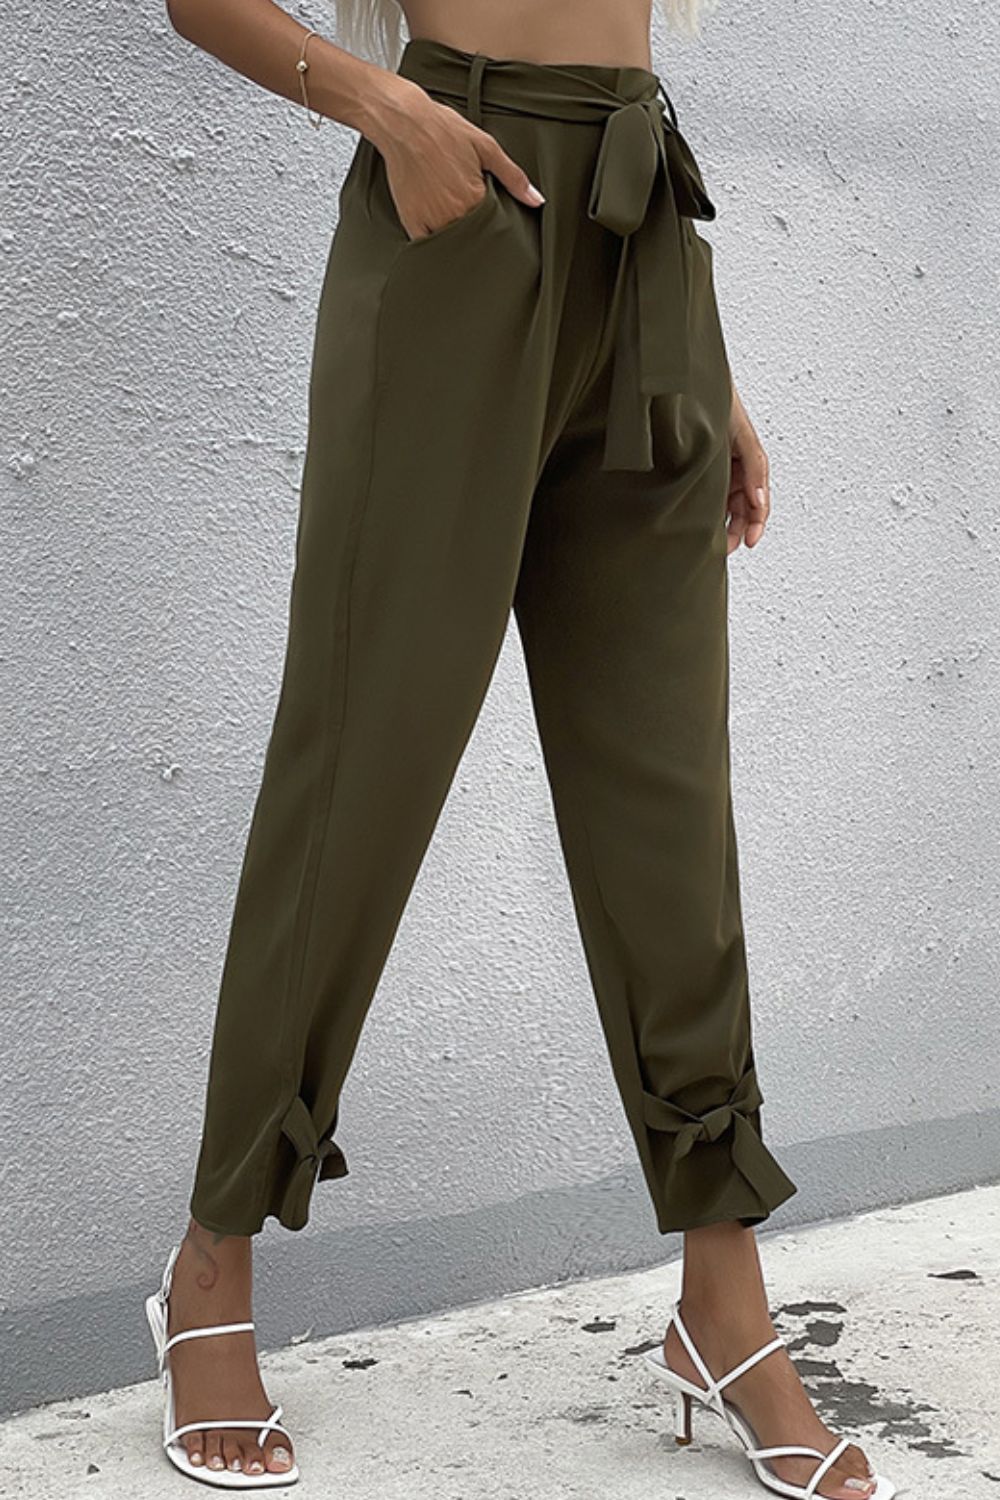 Tie Detail Belted Pants with Pockets COCO CRESS